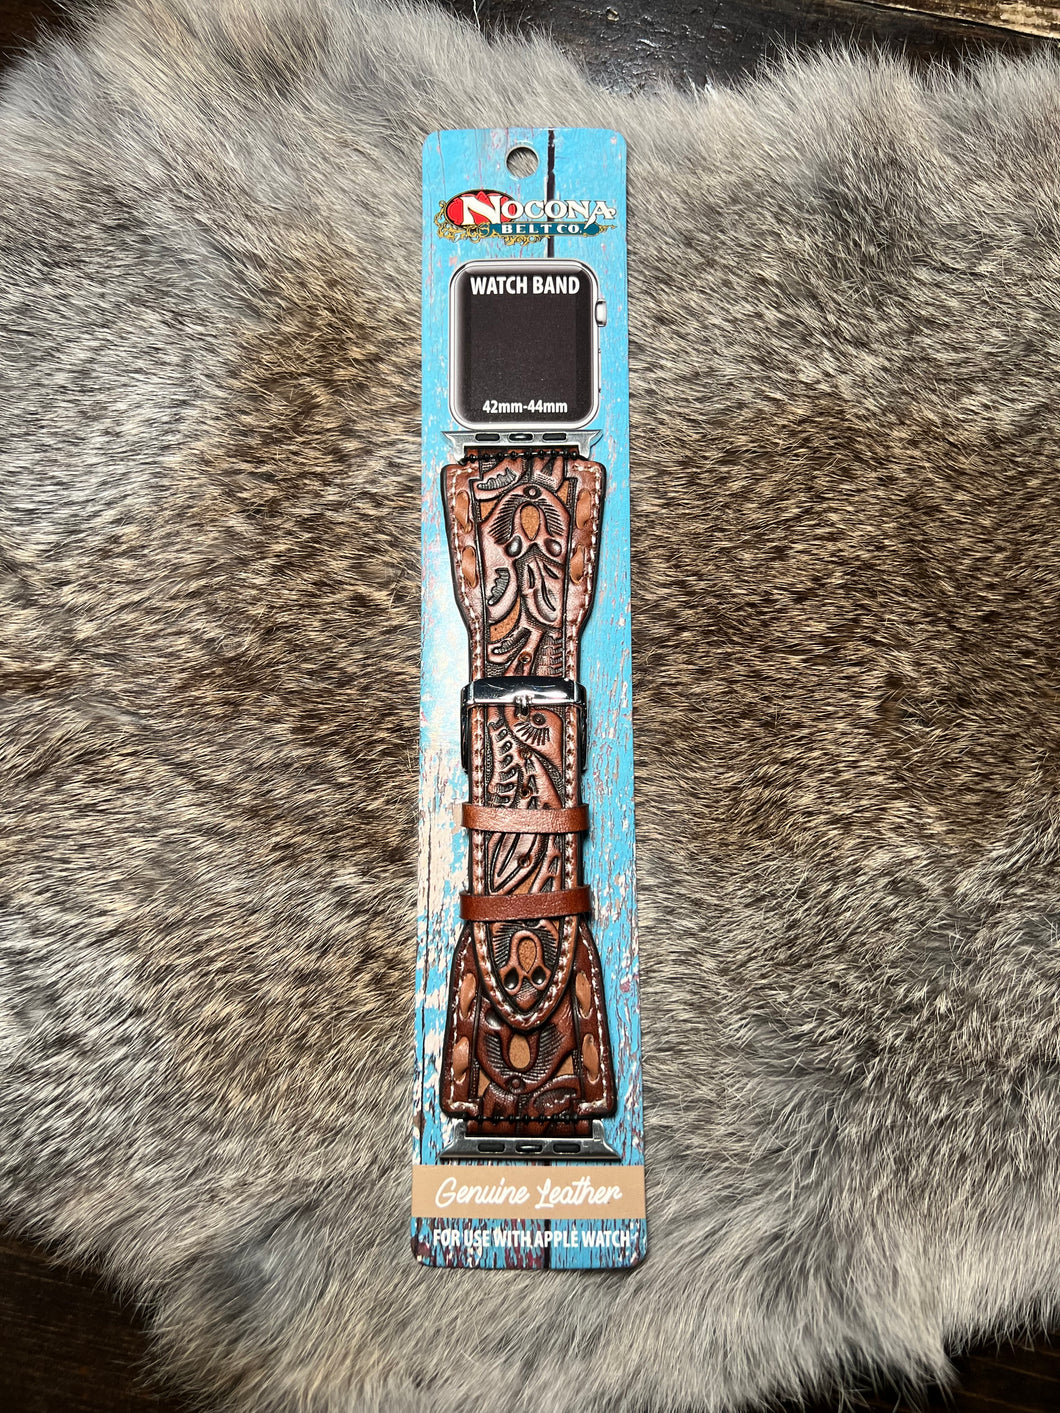 Nocona Watch Band 002 (Large Size 42mm - 44mm)